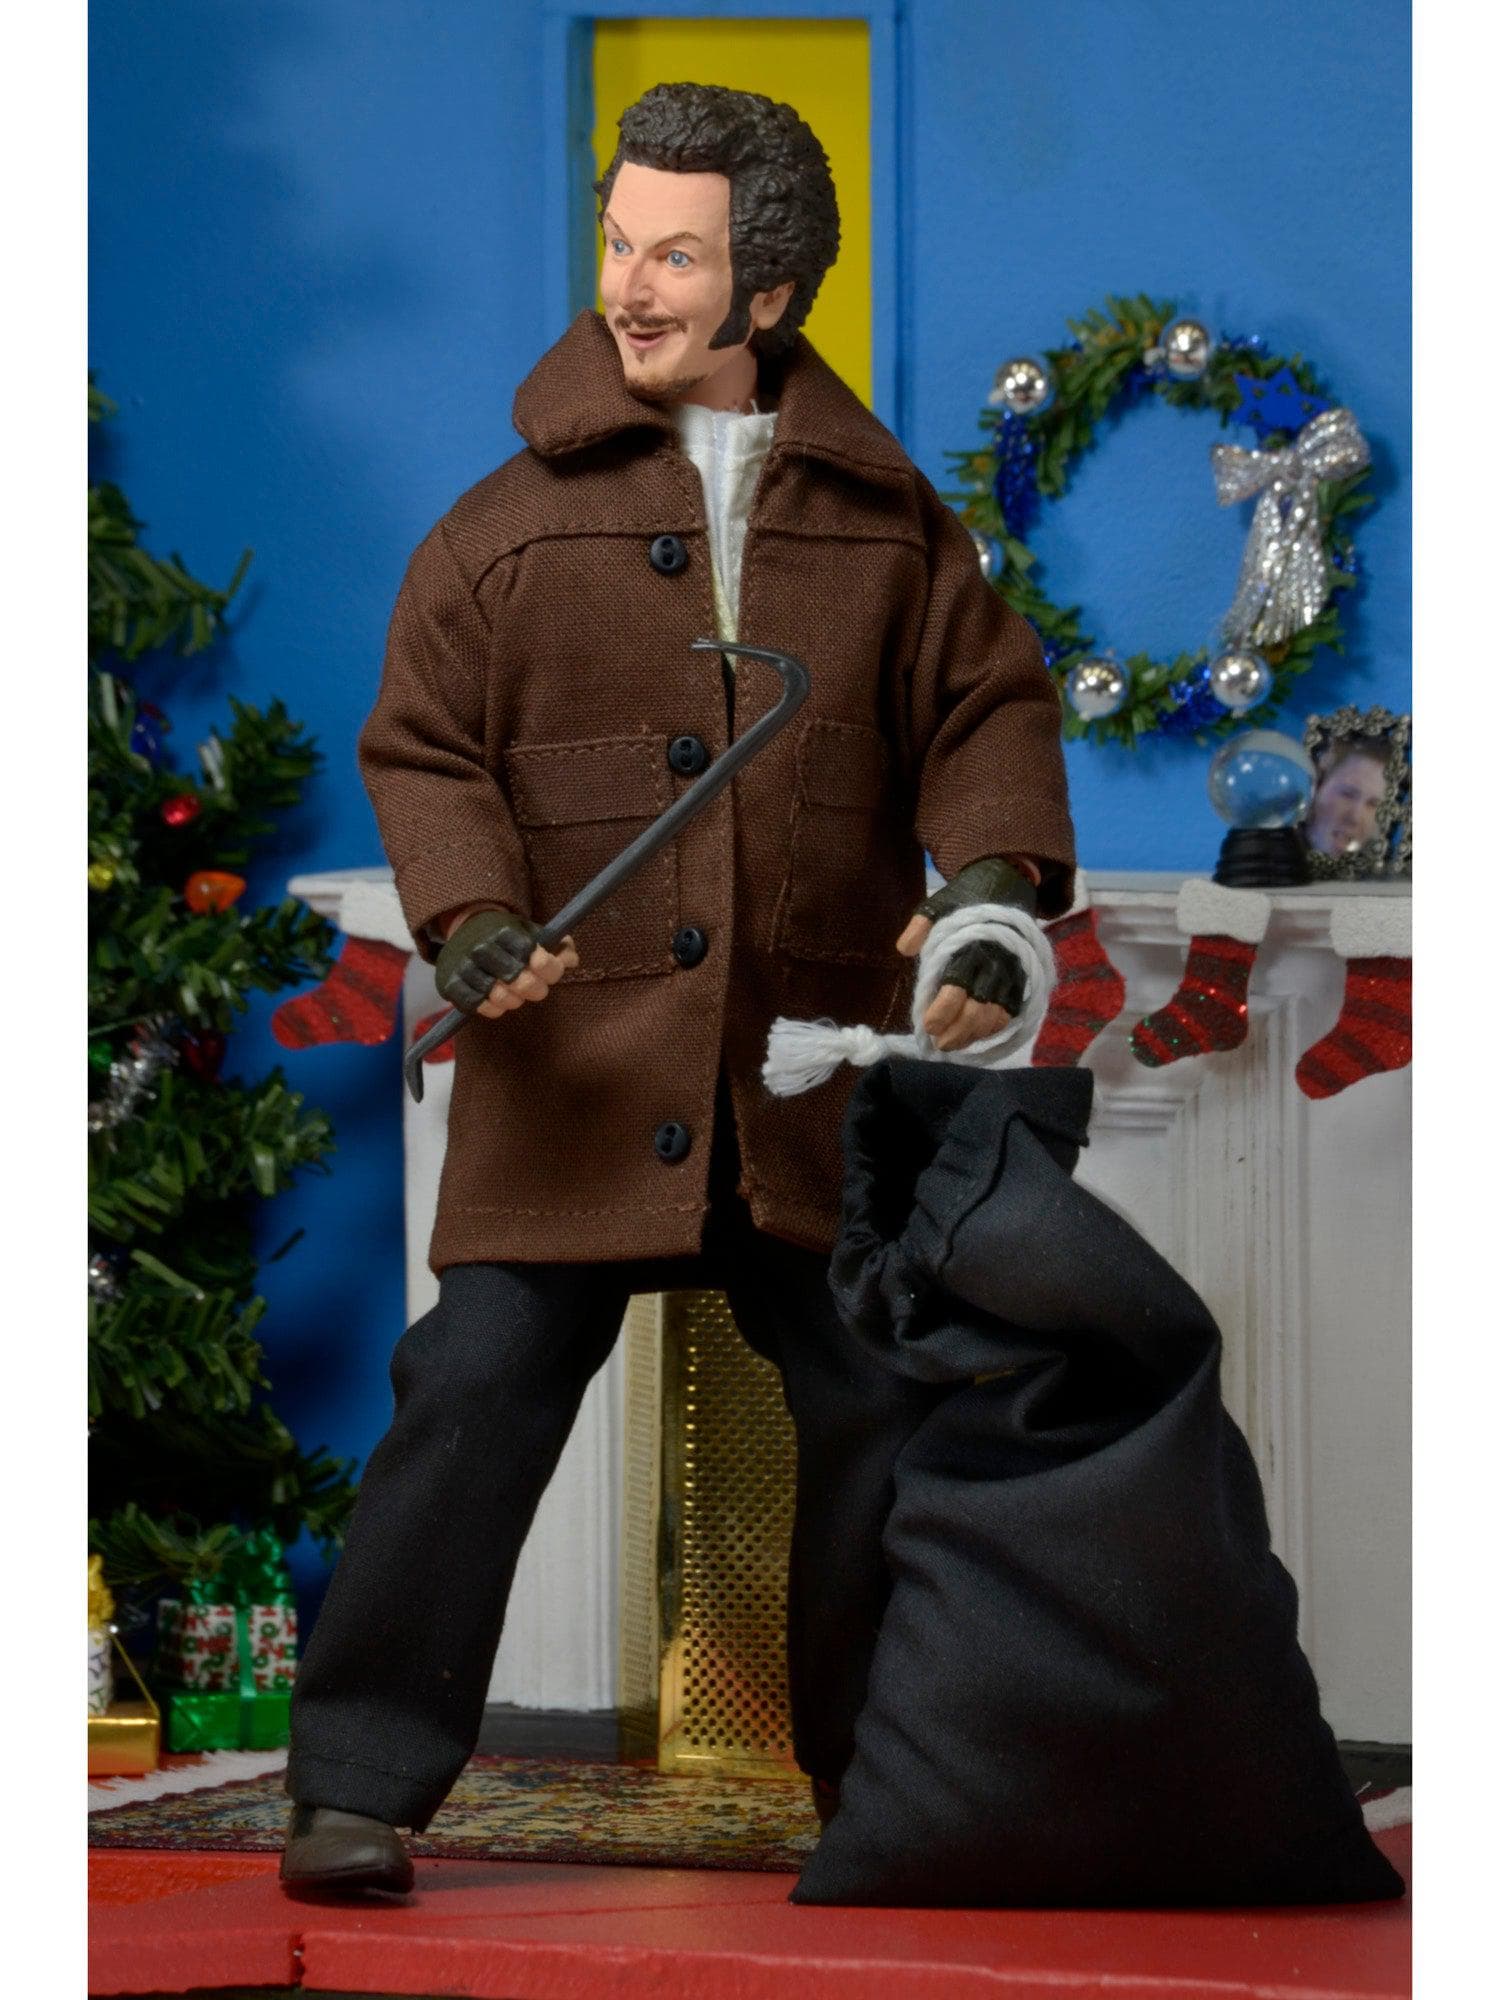 NECA - Home Alone - 8" Scale Clothed Action Figure - Marv - costumes.com